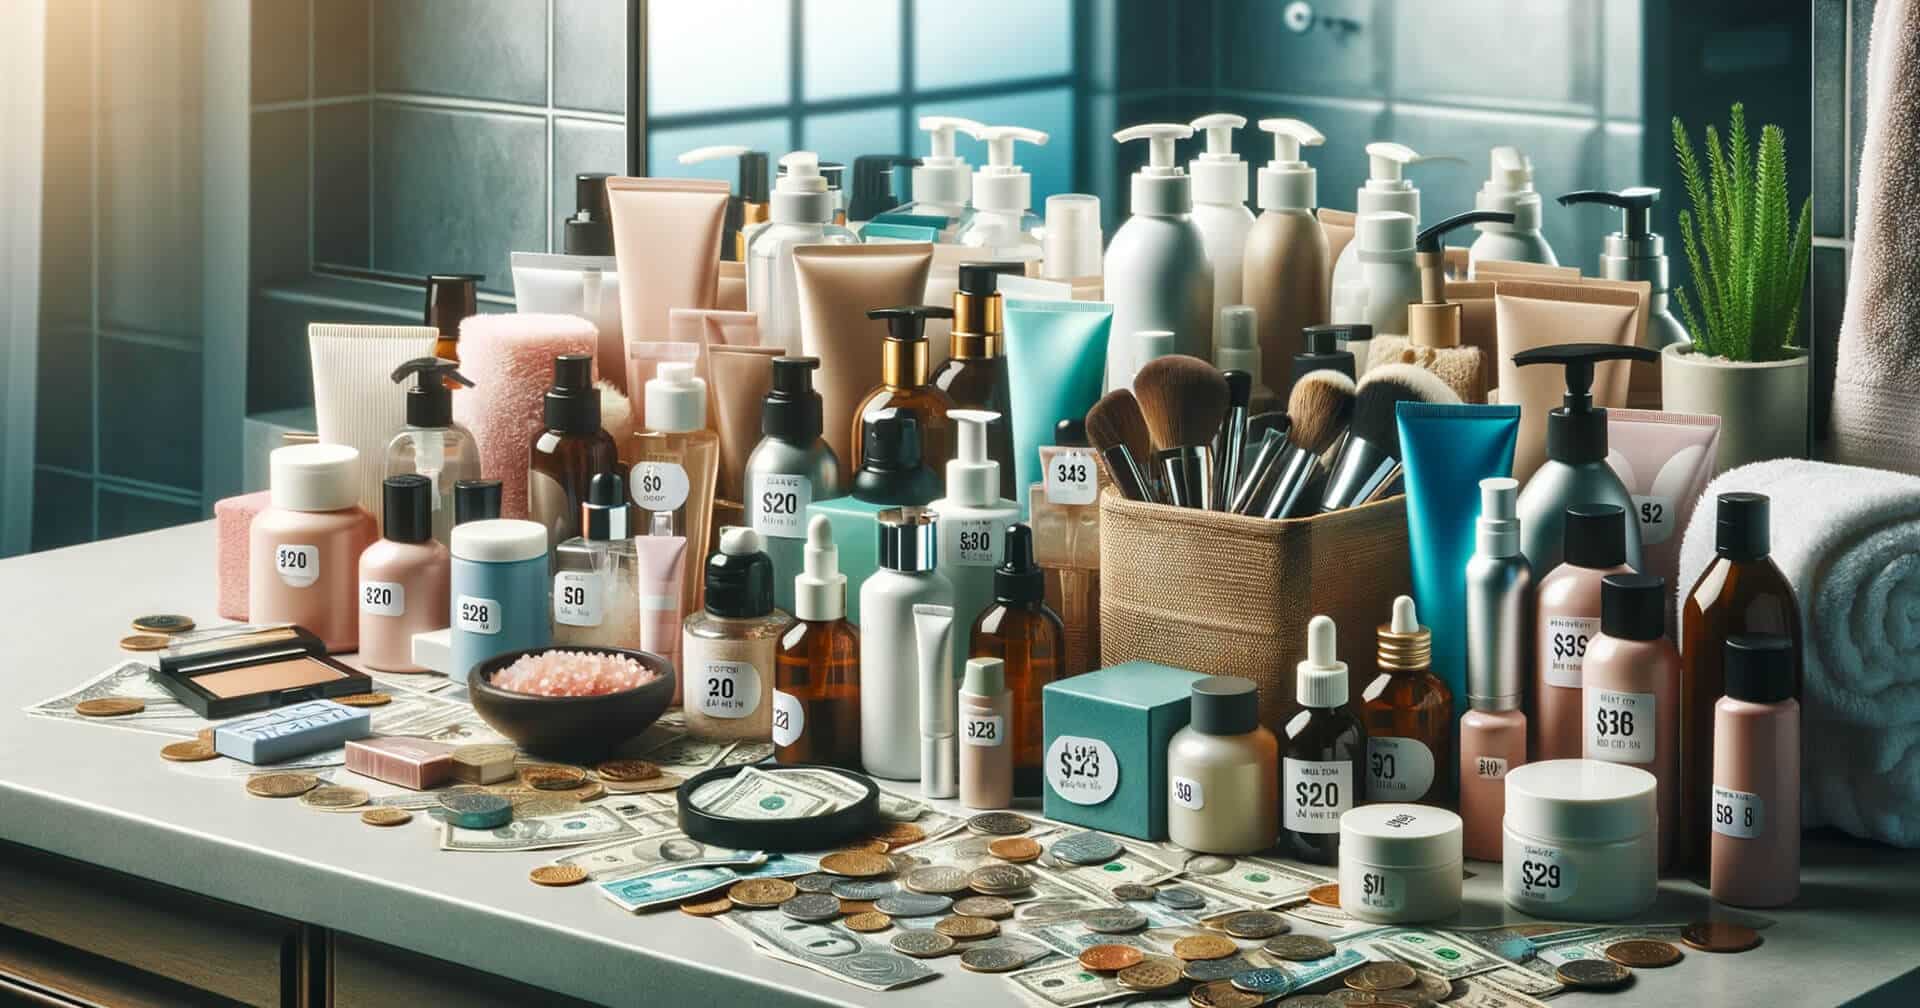 Beauty & Personal Care products on a counter in a bathroom.